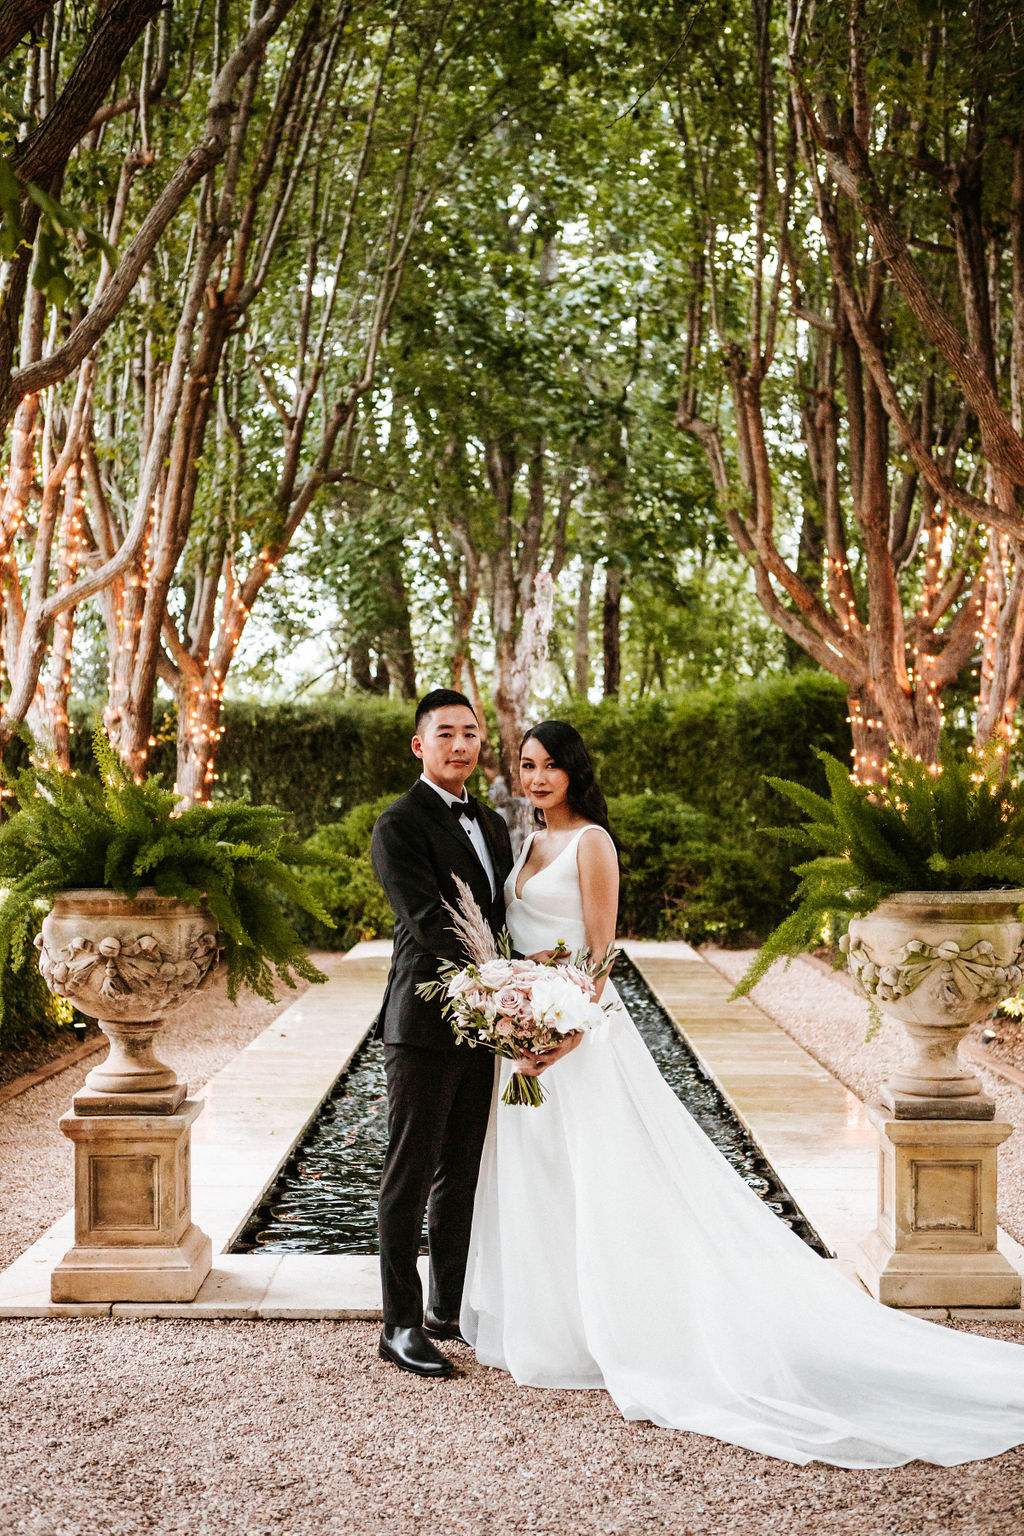 KWH bride Win wears the Modern A-line Aisha gown by Karen Willis Holmes, a non-traditional wedding dress.